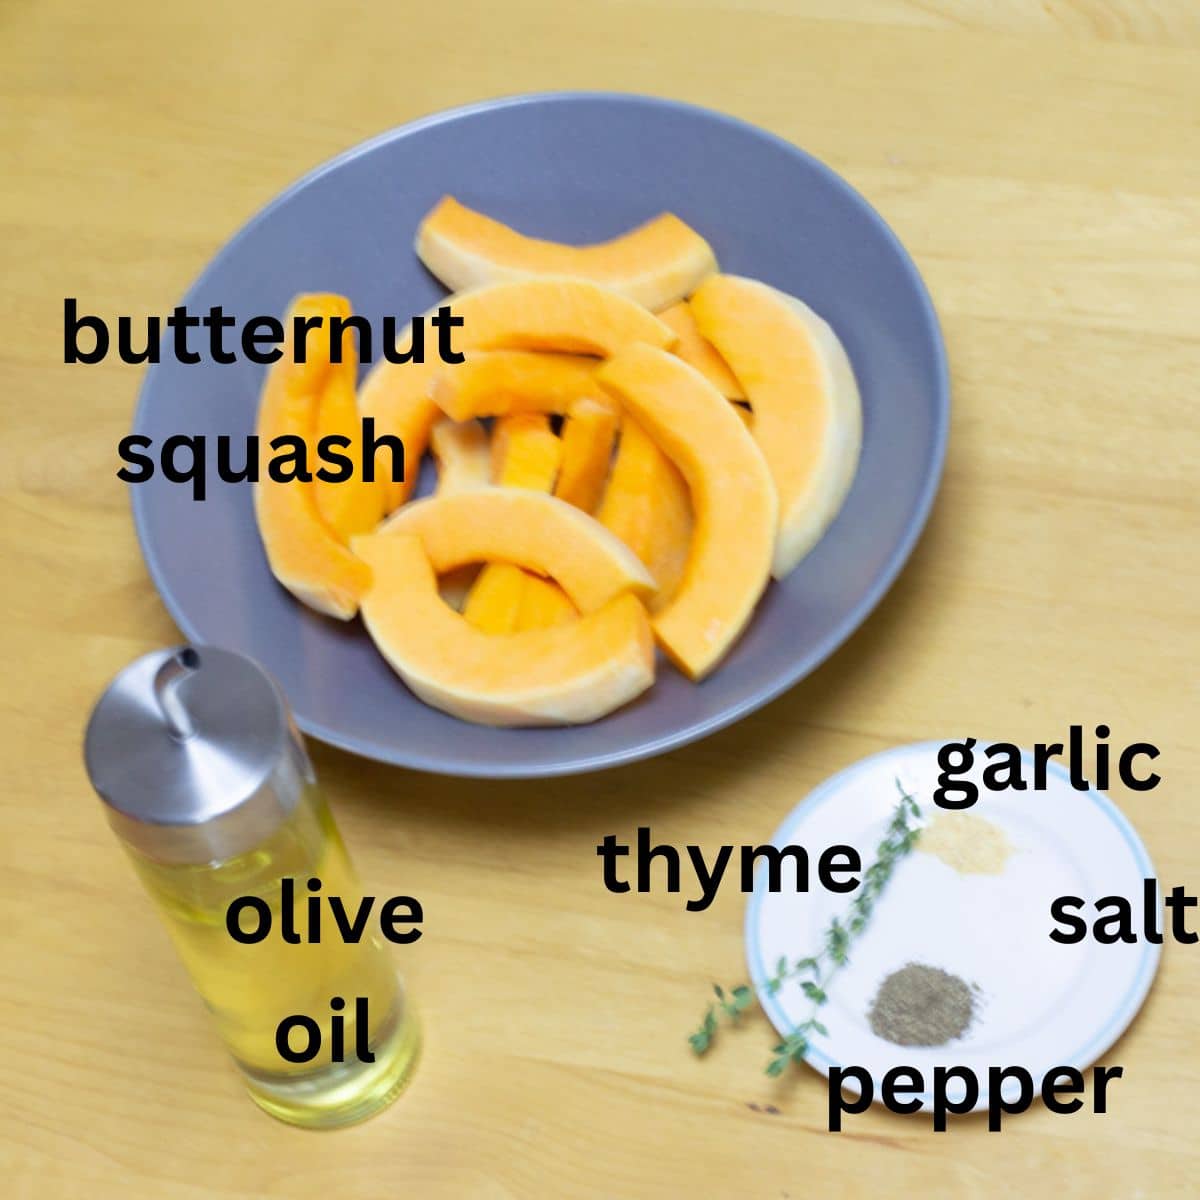 butternut squash, oil and seasoning placed on a wooden table.